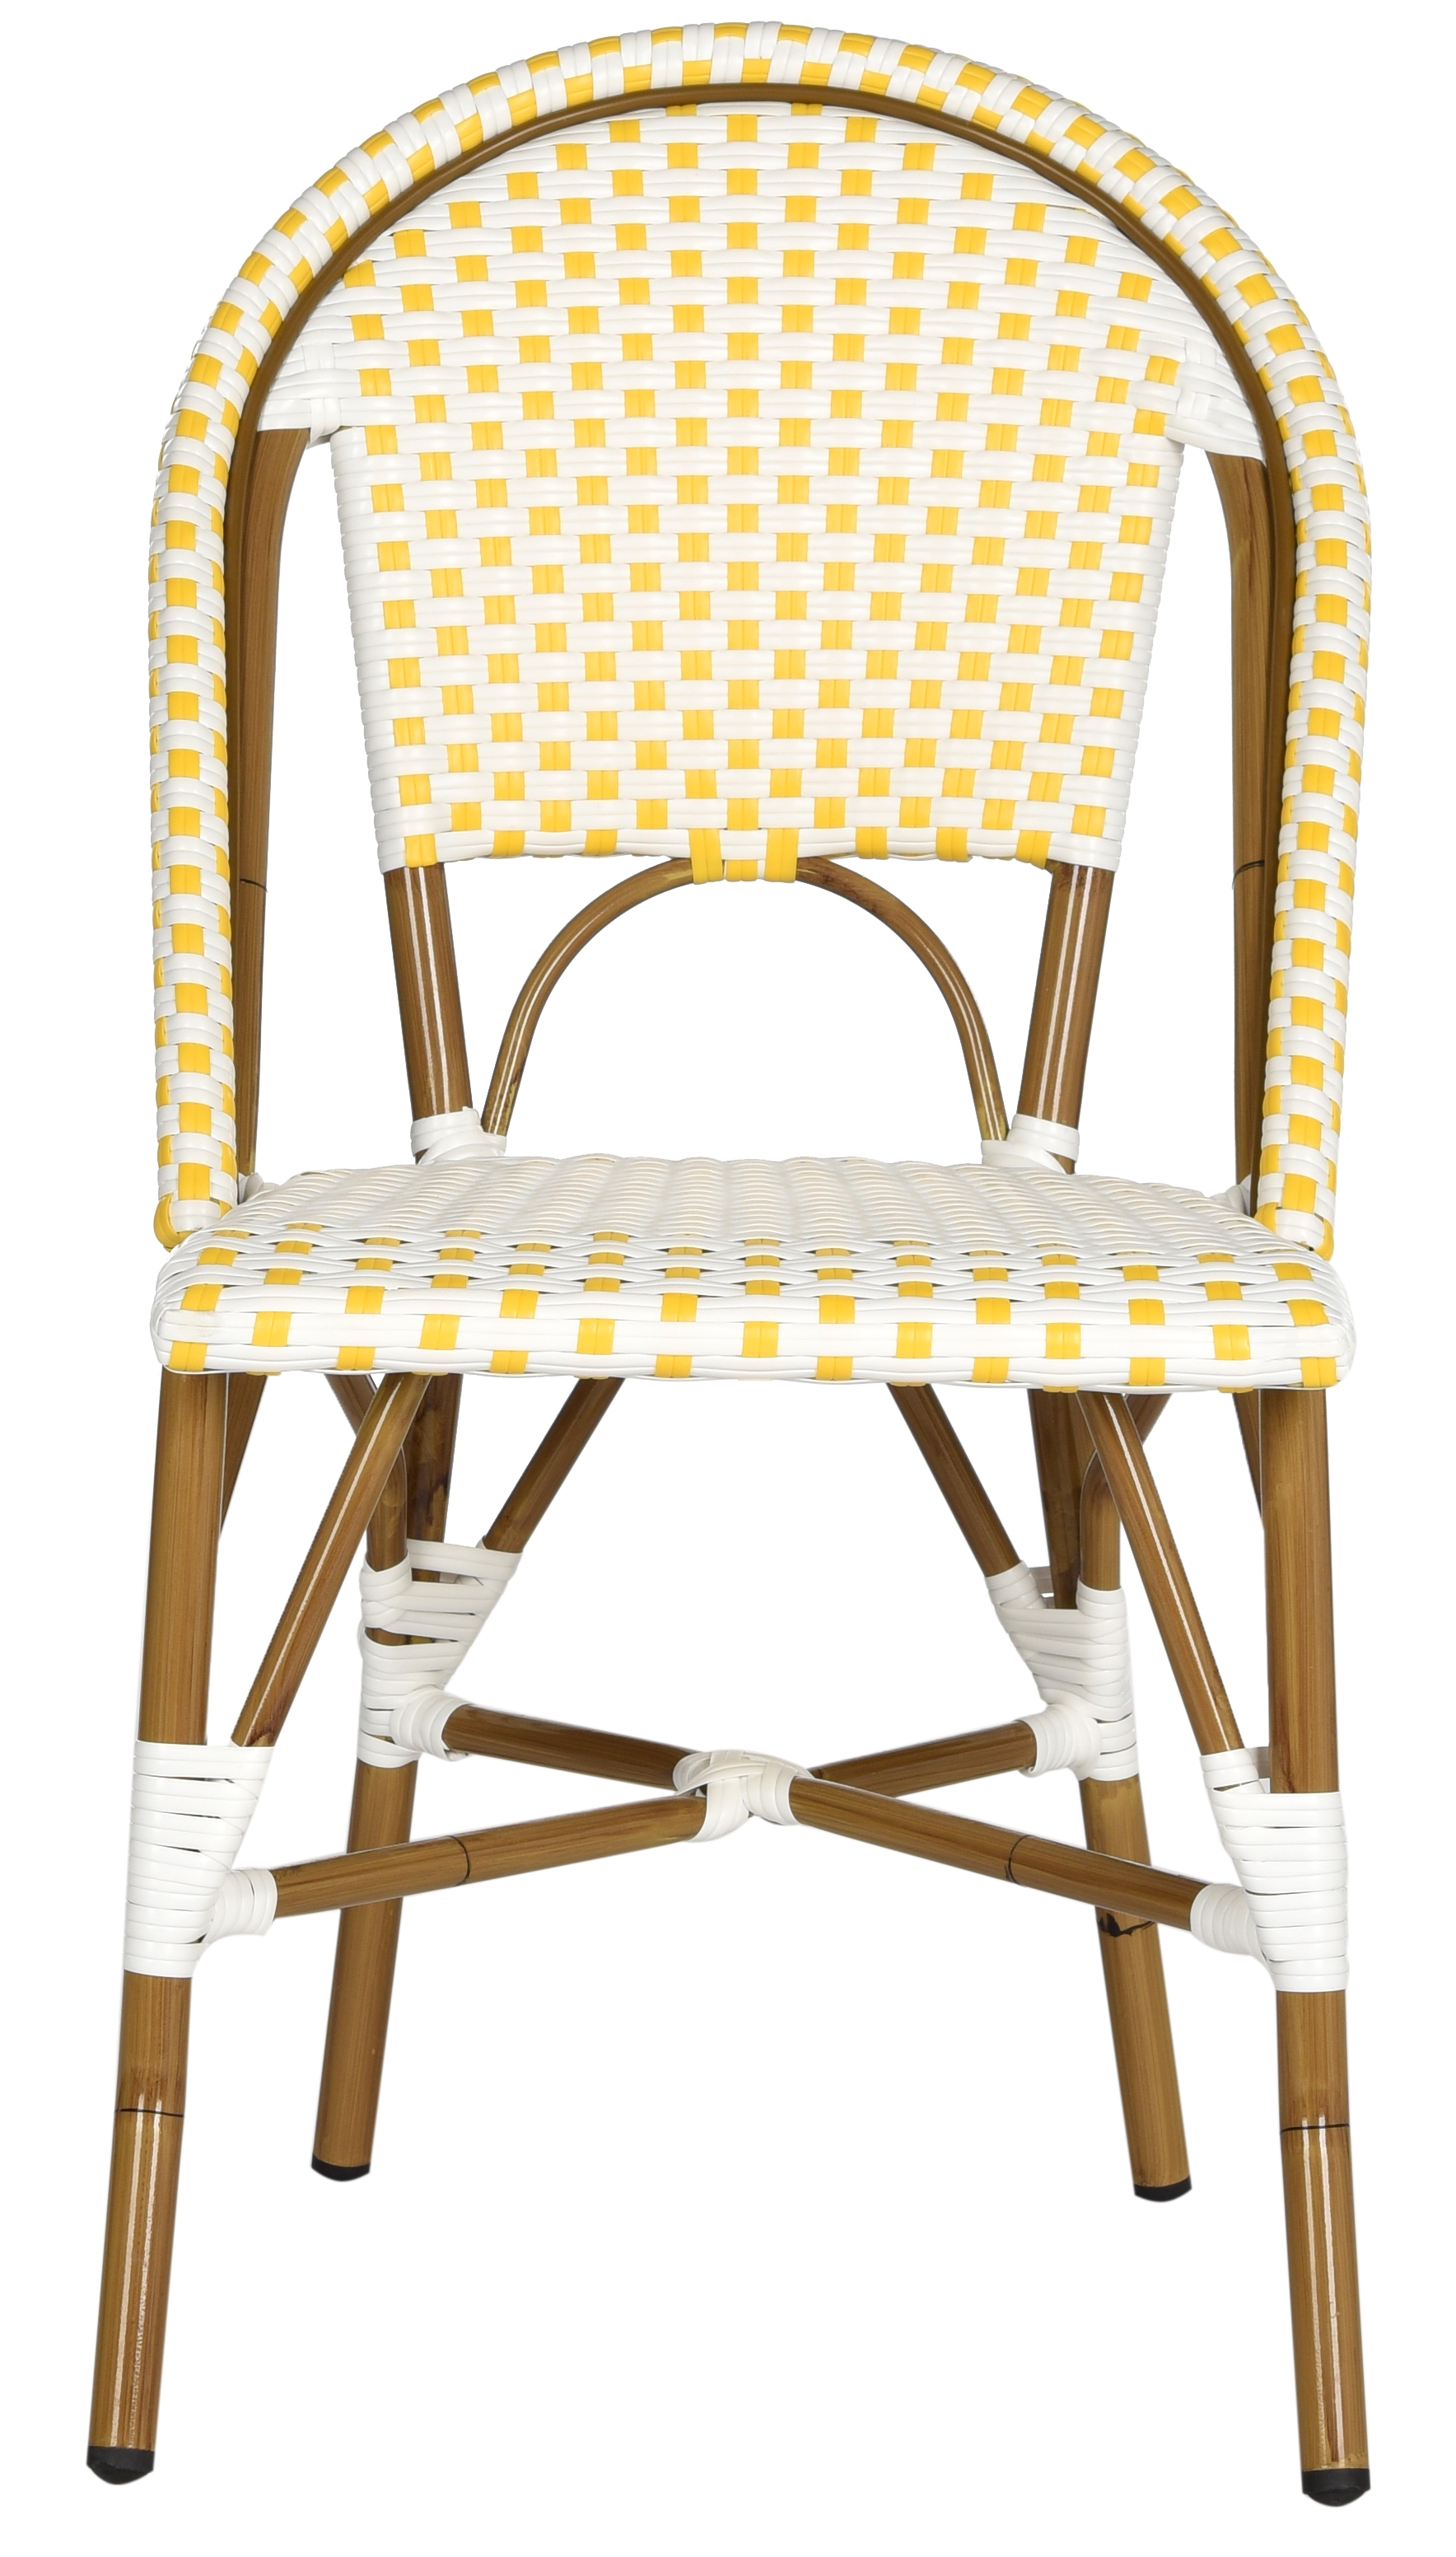 Salcha Indoor-Outdoor French Bistro Stacking Side Chair - Yellow/White/Light Brown - Arlo Home - Image 1